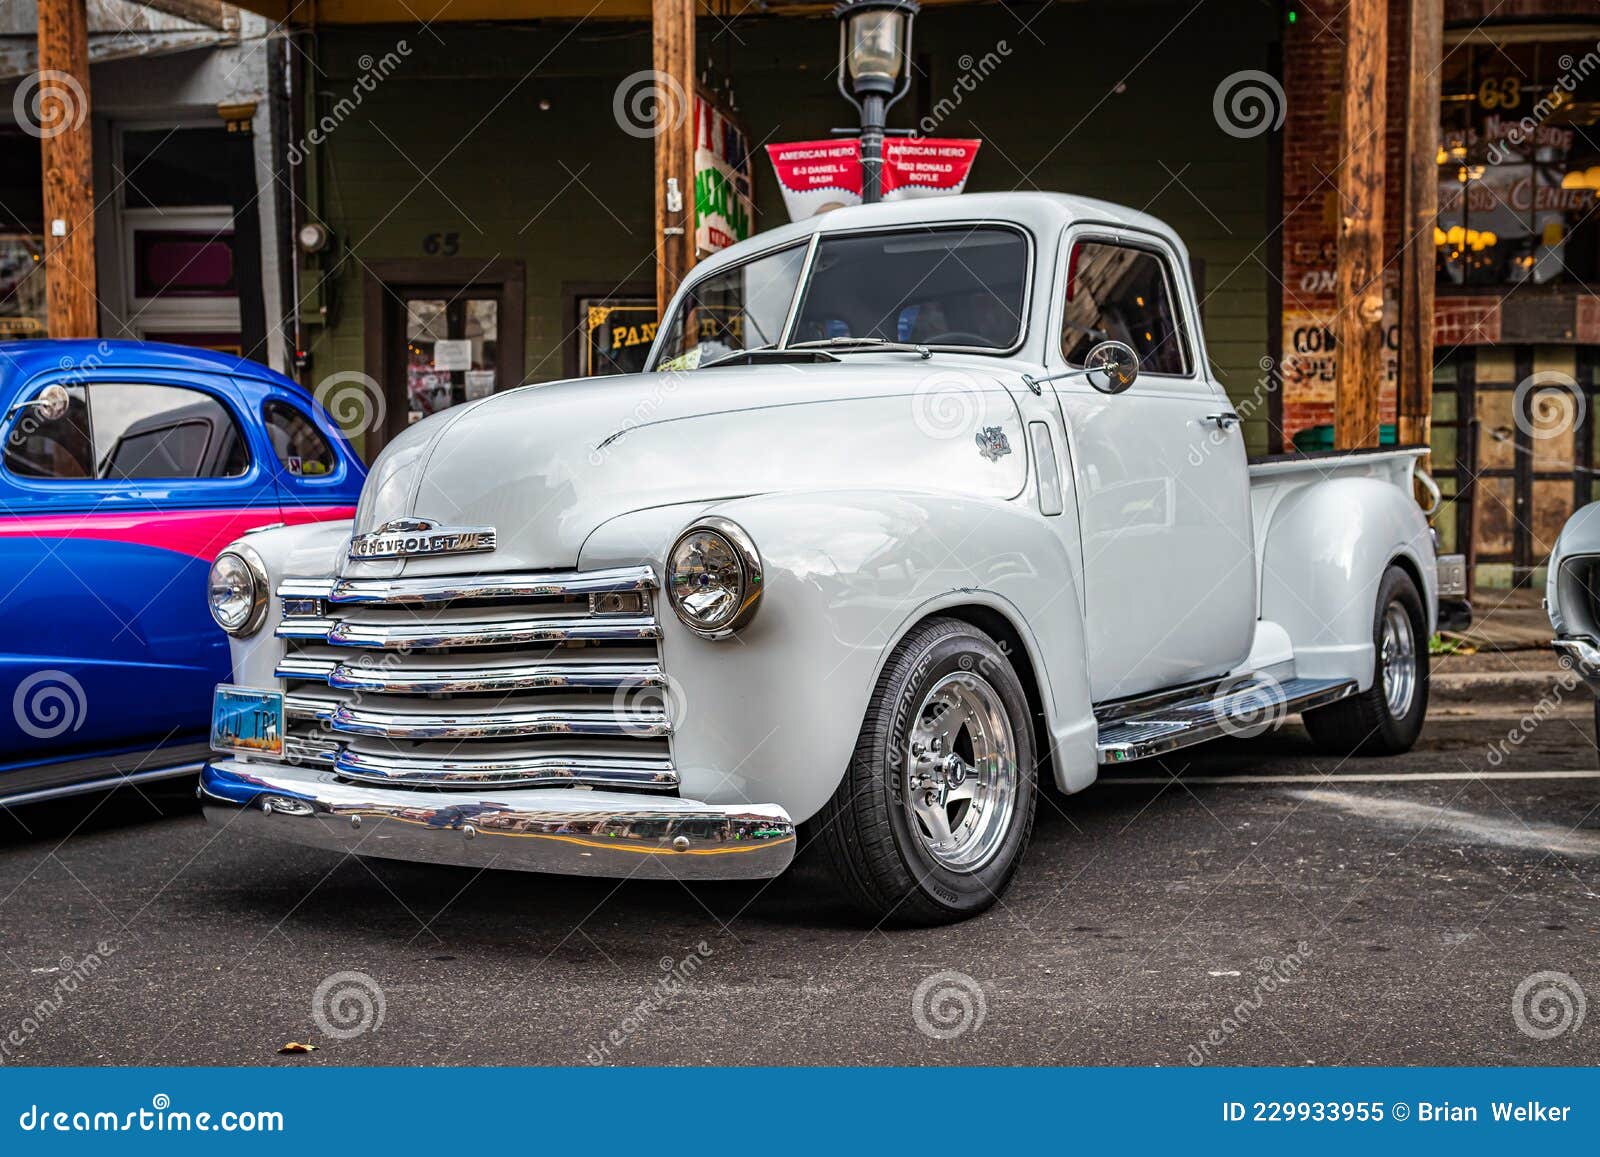 1,740 Truck Unique Photos - Free & Royalty-Free Stock Photos from  Dreamstime - Page 8